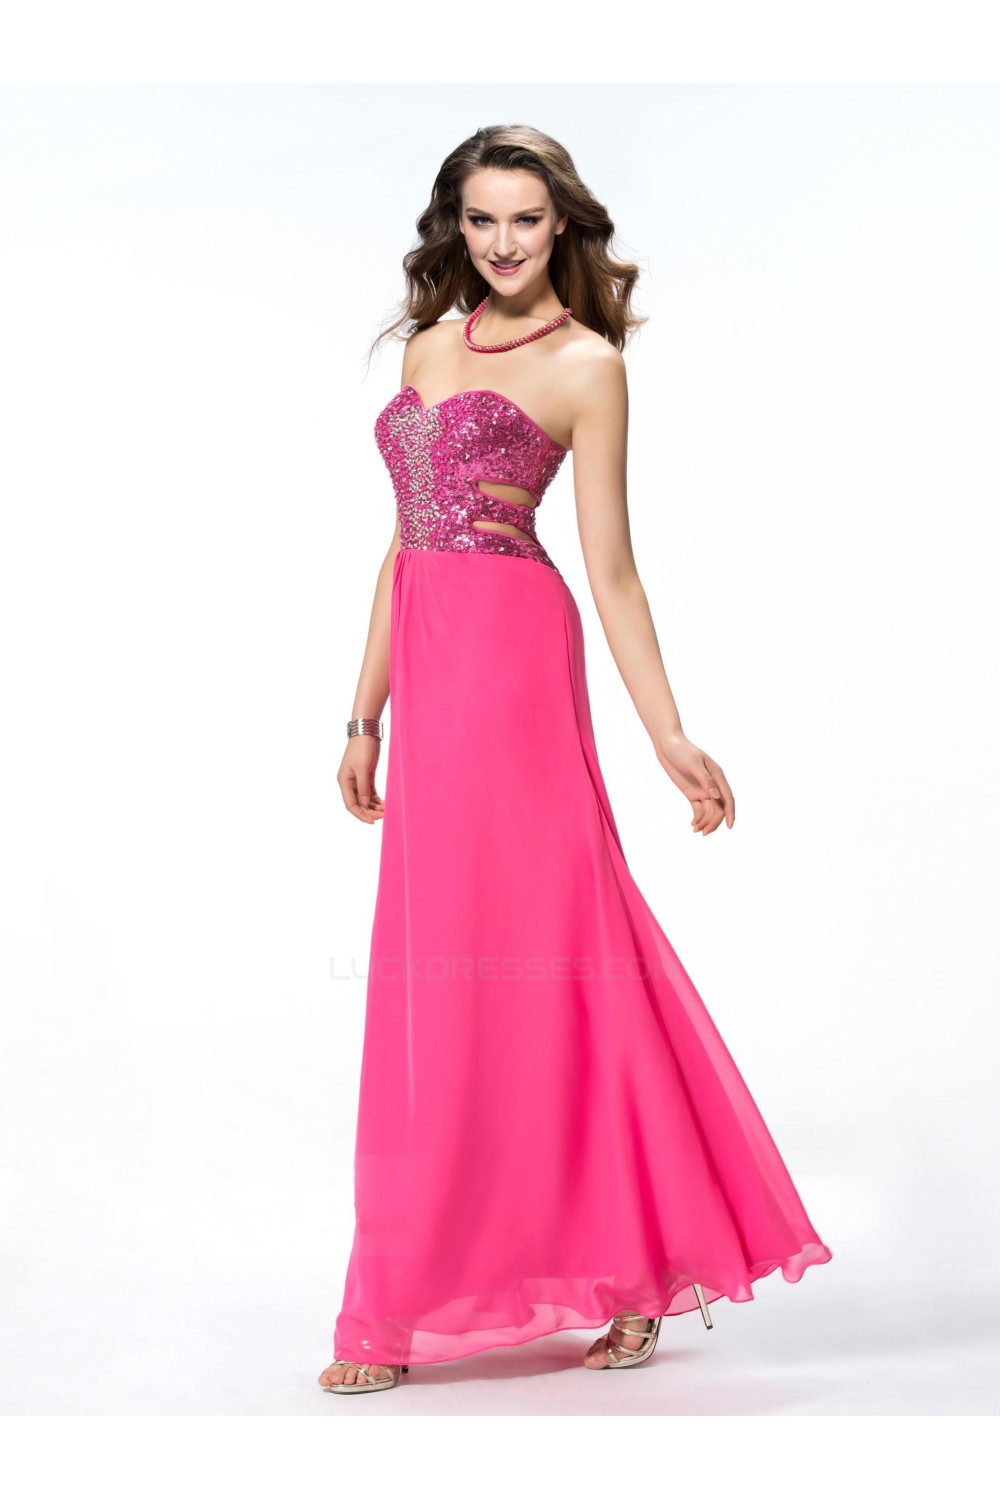 Long Pink Beaded Sequin Chiffon Prom Evening Formal Party Dresses ED010549